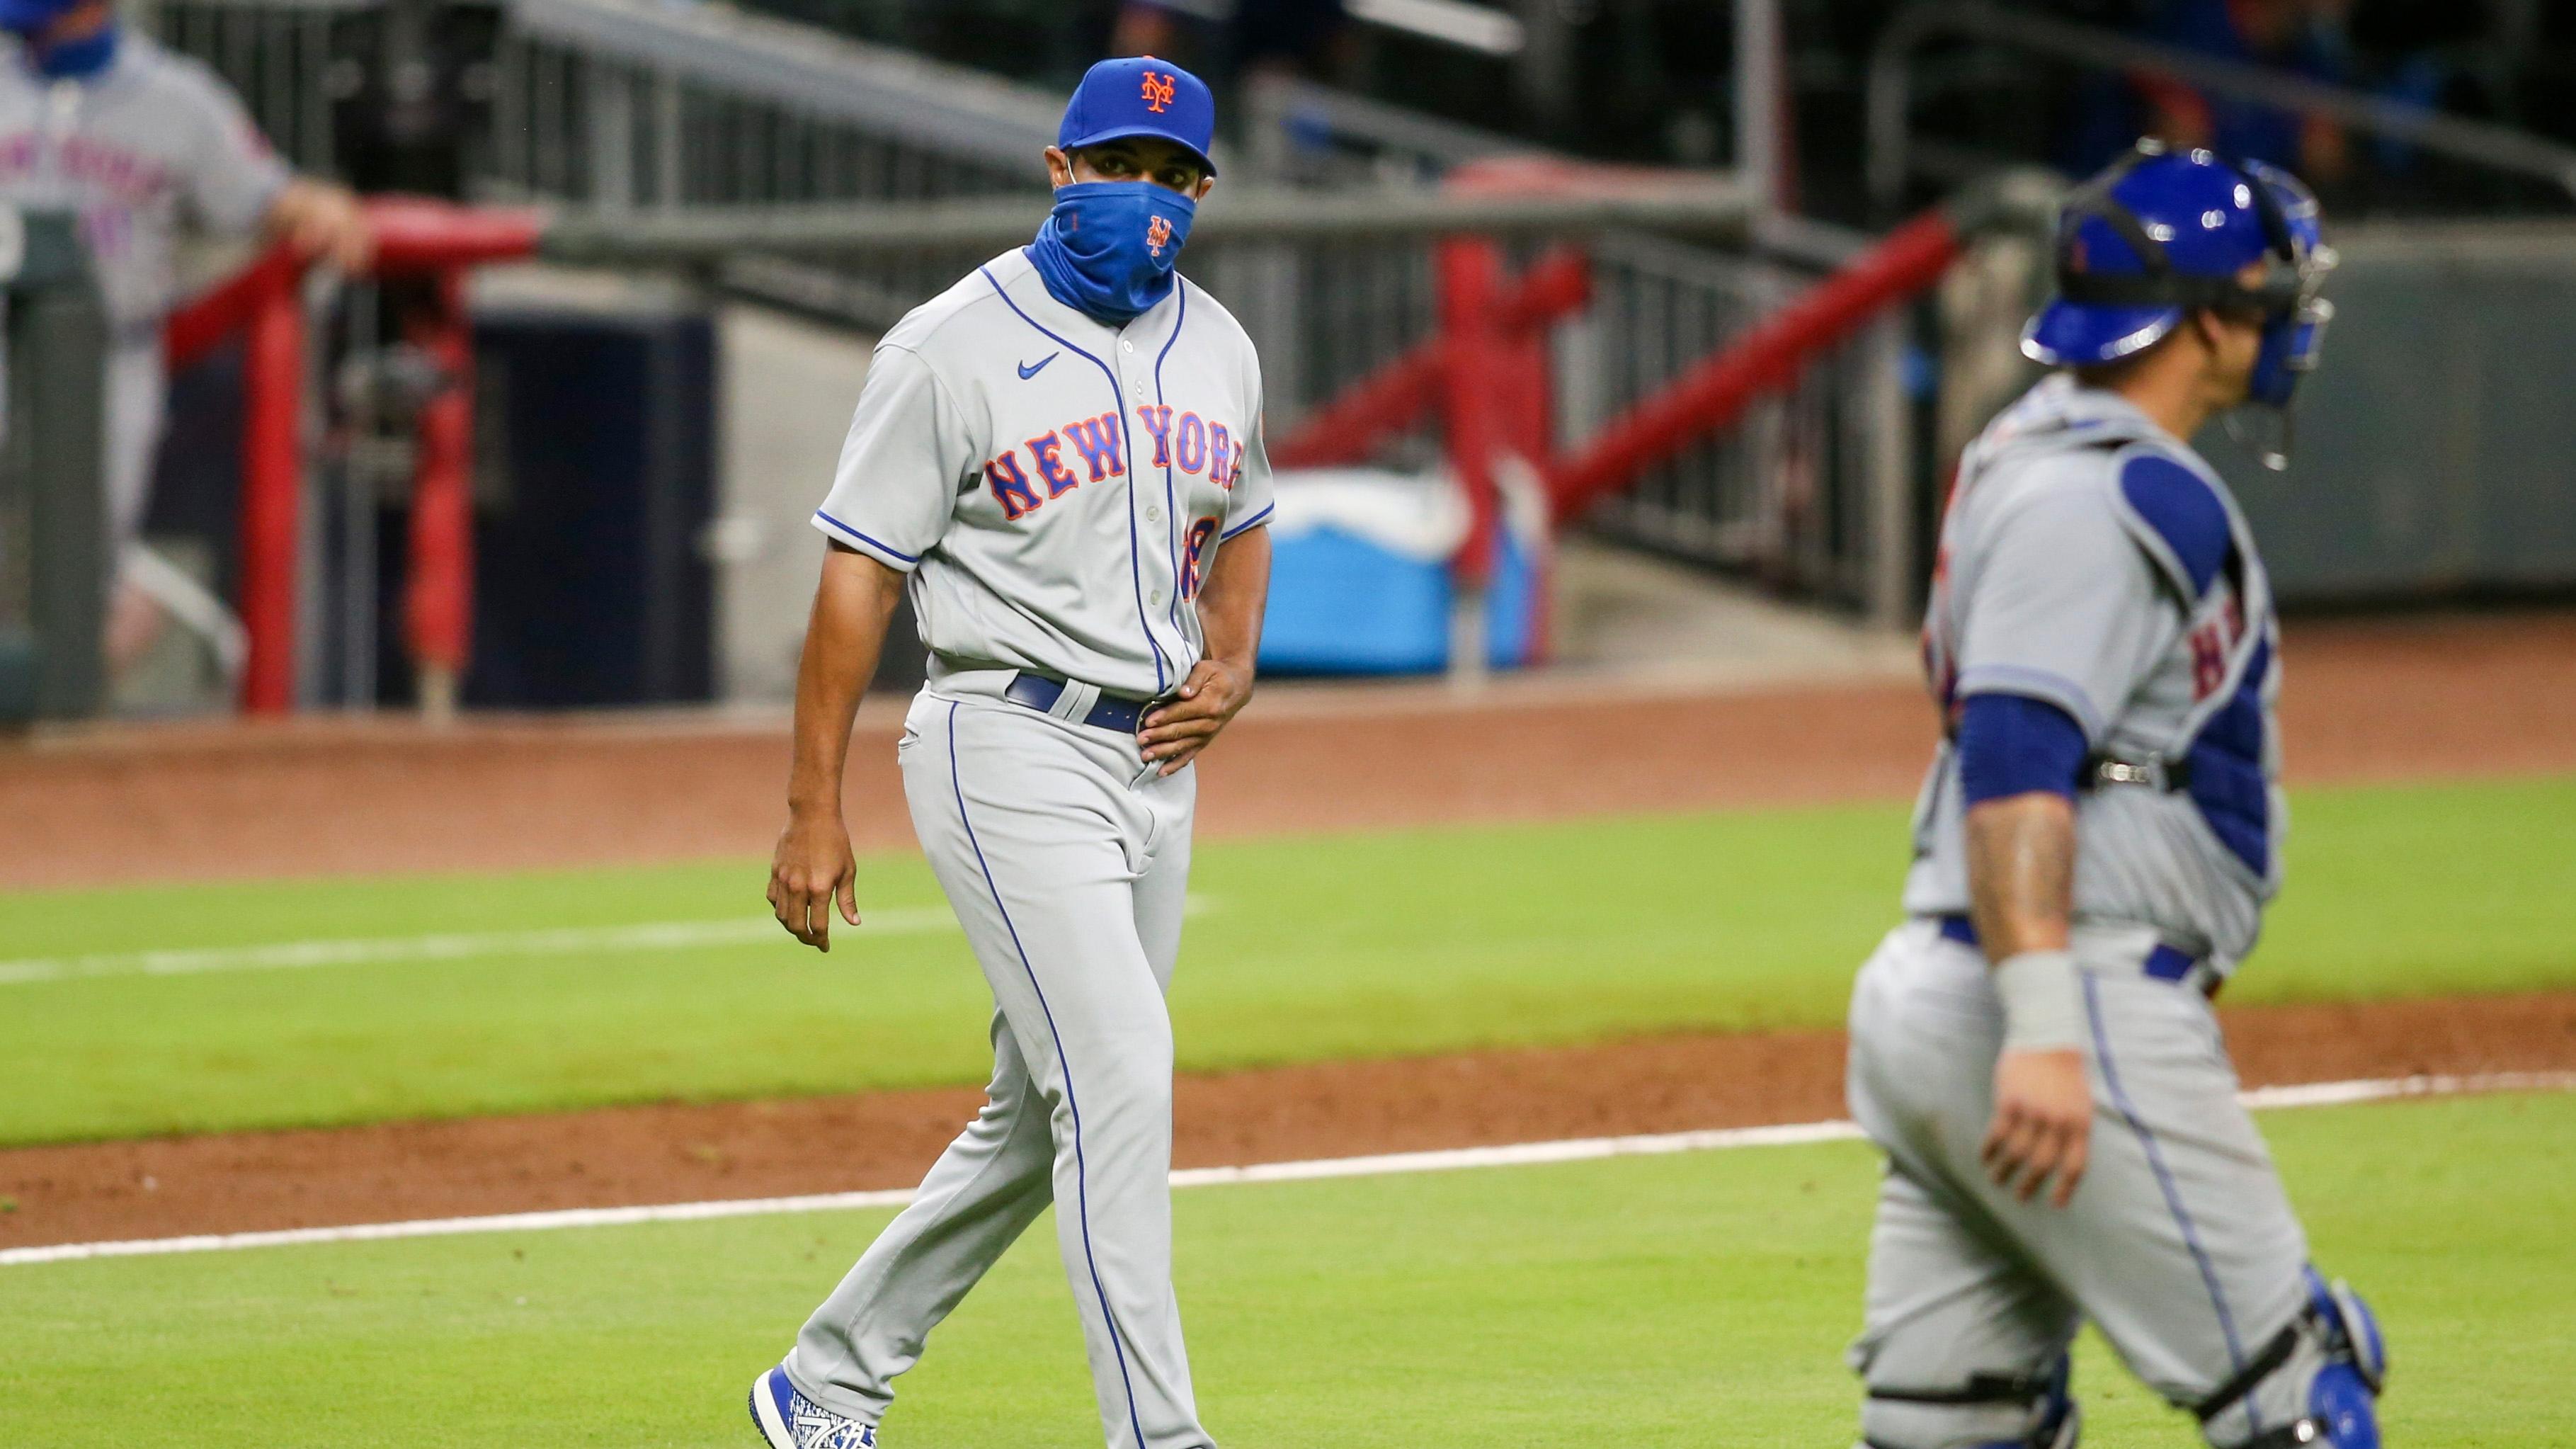 Mets manager Luis Rojas walks to the mound / USA TODAY